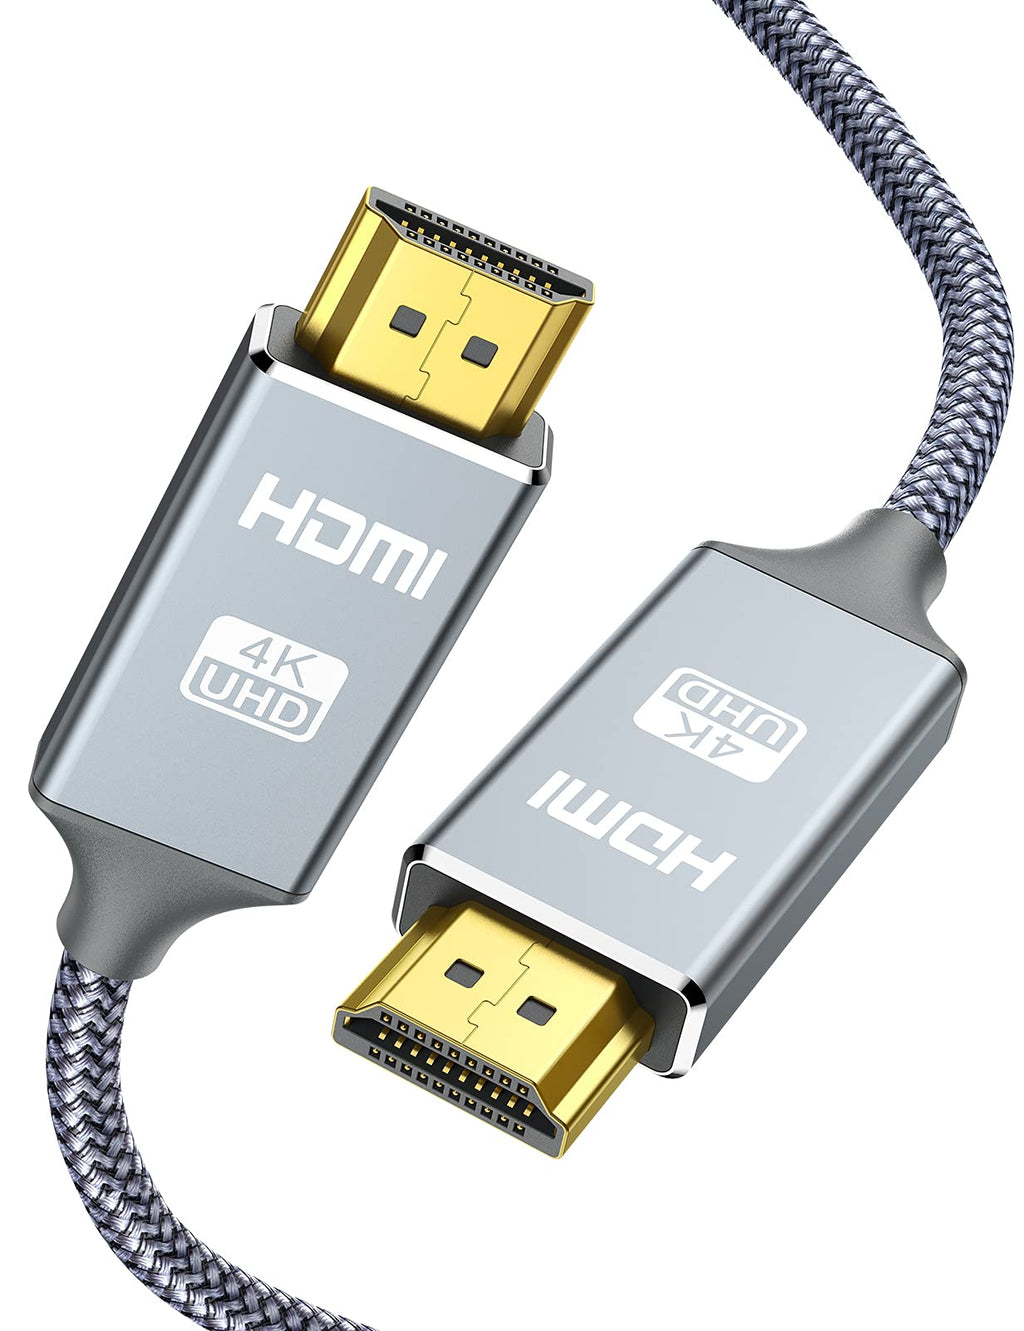 HDMI Cable 3FT - Braided Cord - 4K HDMI 2.0 Ready - High Speed - Gold Plated Connectors - Ethernet/Audio Return Channel - Video 4K UHD 2160p, HD 1080p, 3D - Compatible UHD TV, Blu-ray, PS4/3, Monitor 3.3 feet Grey - LeoForward Australia